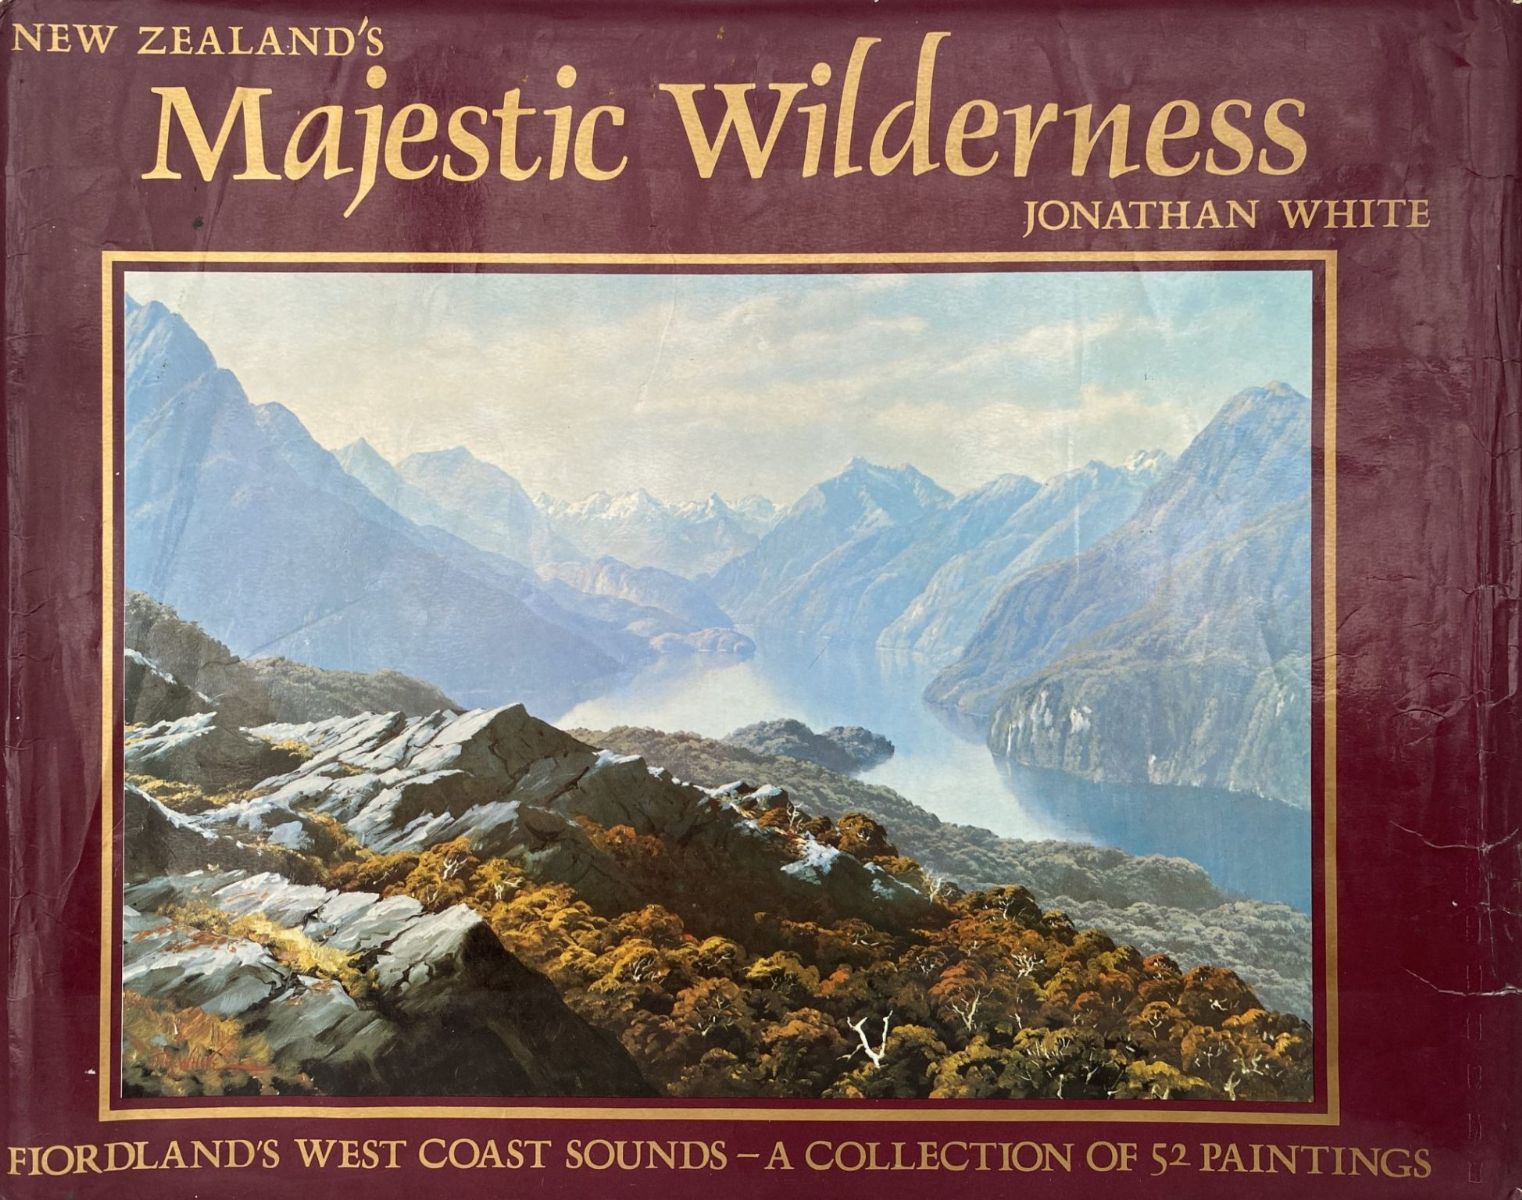 NEW ZEALAND'S MAJESTIC WILDERNESS: Fiordland's West Coast Sounds - A Collection of 52 Paintings